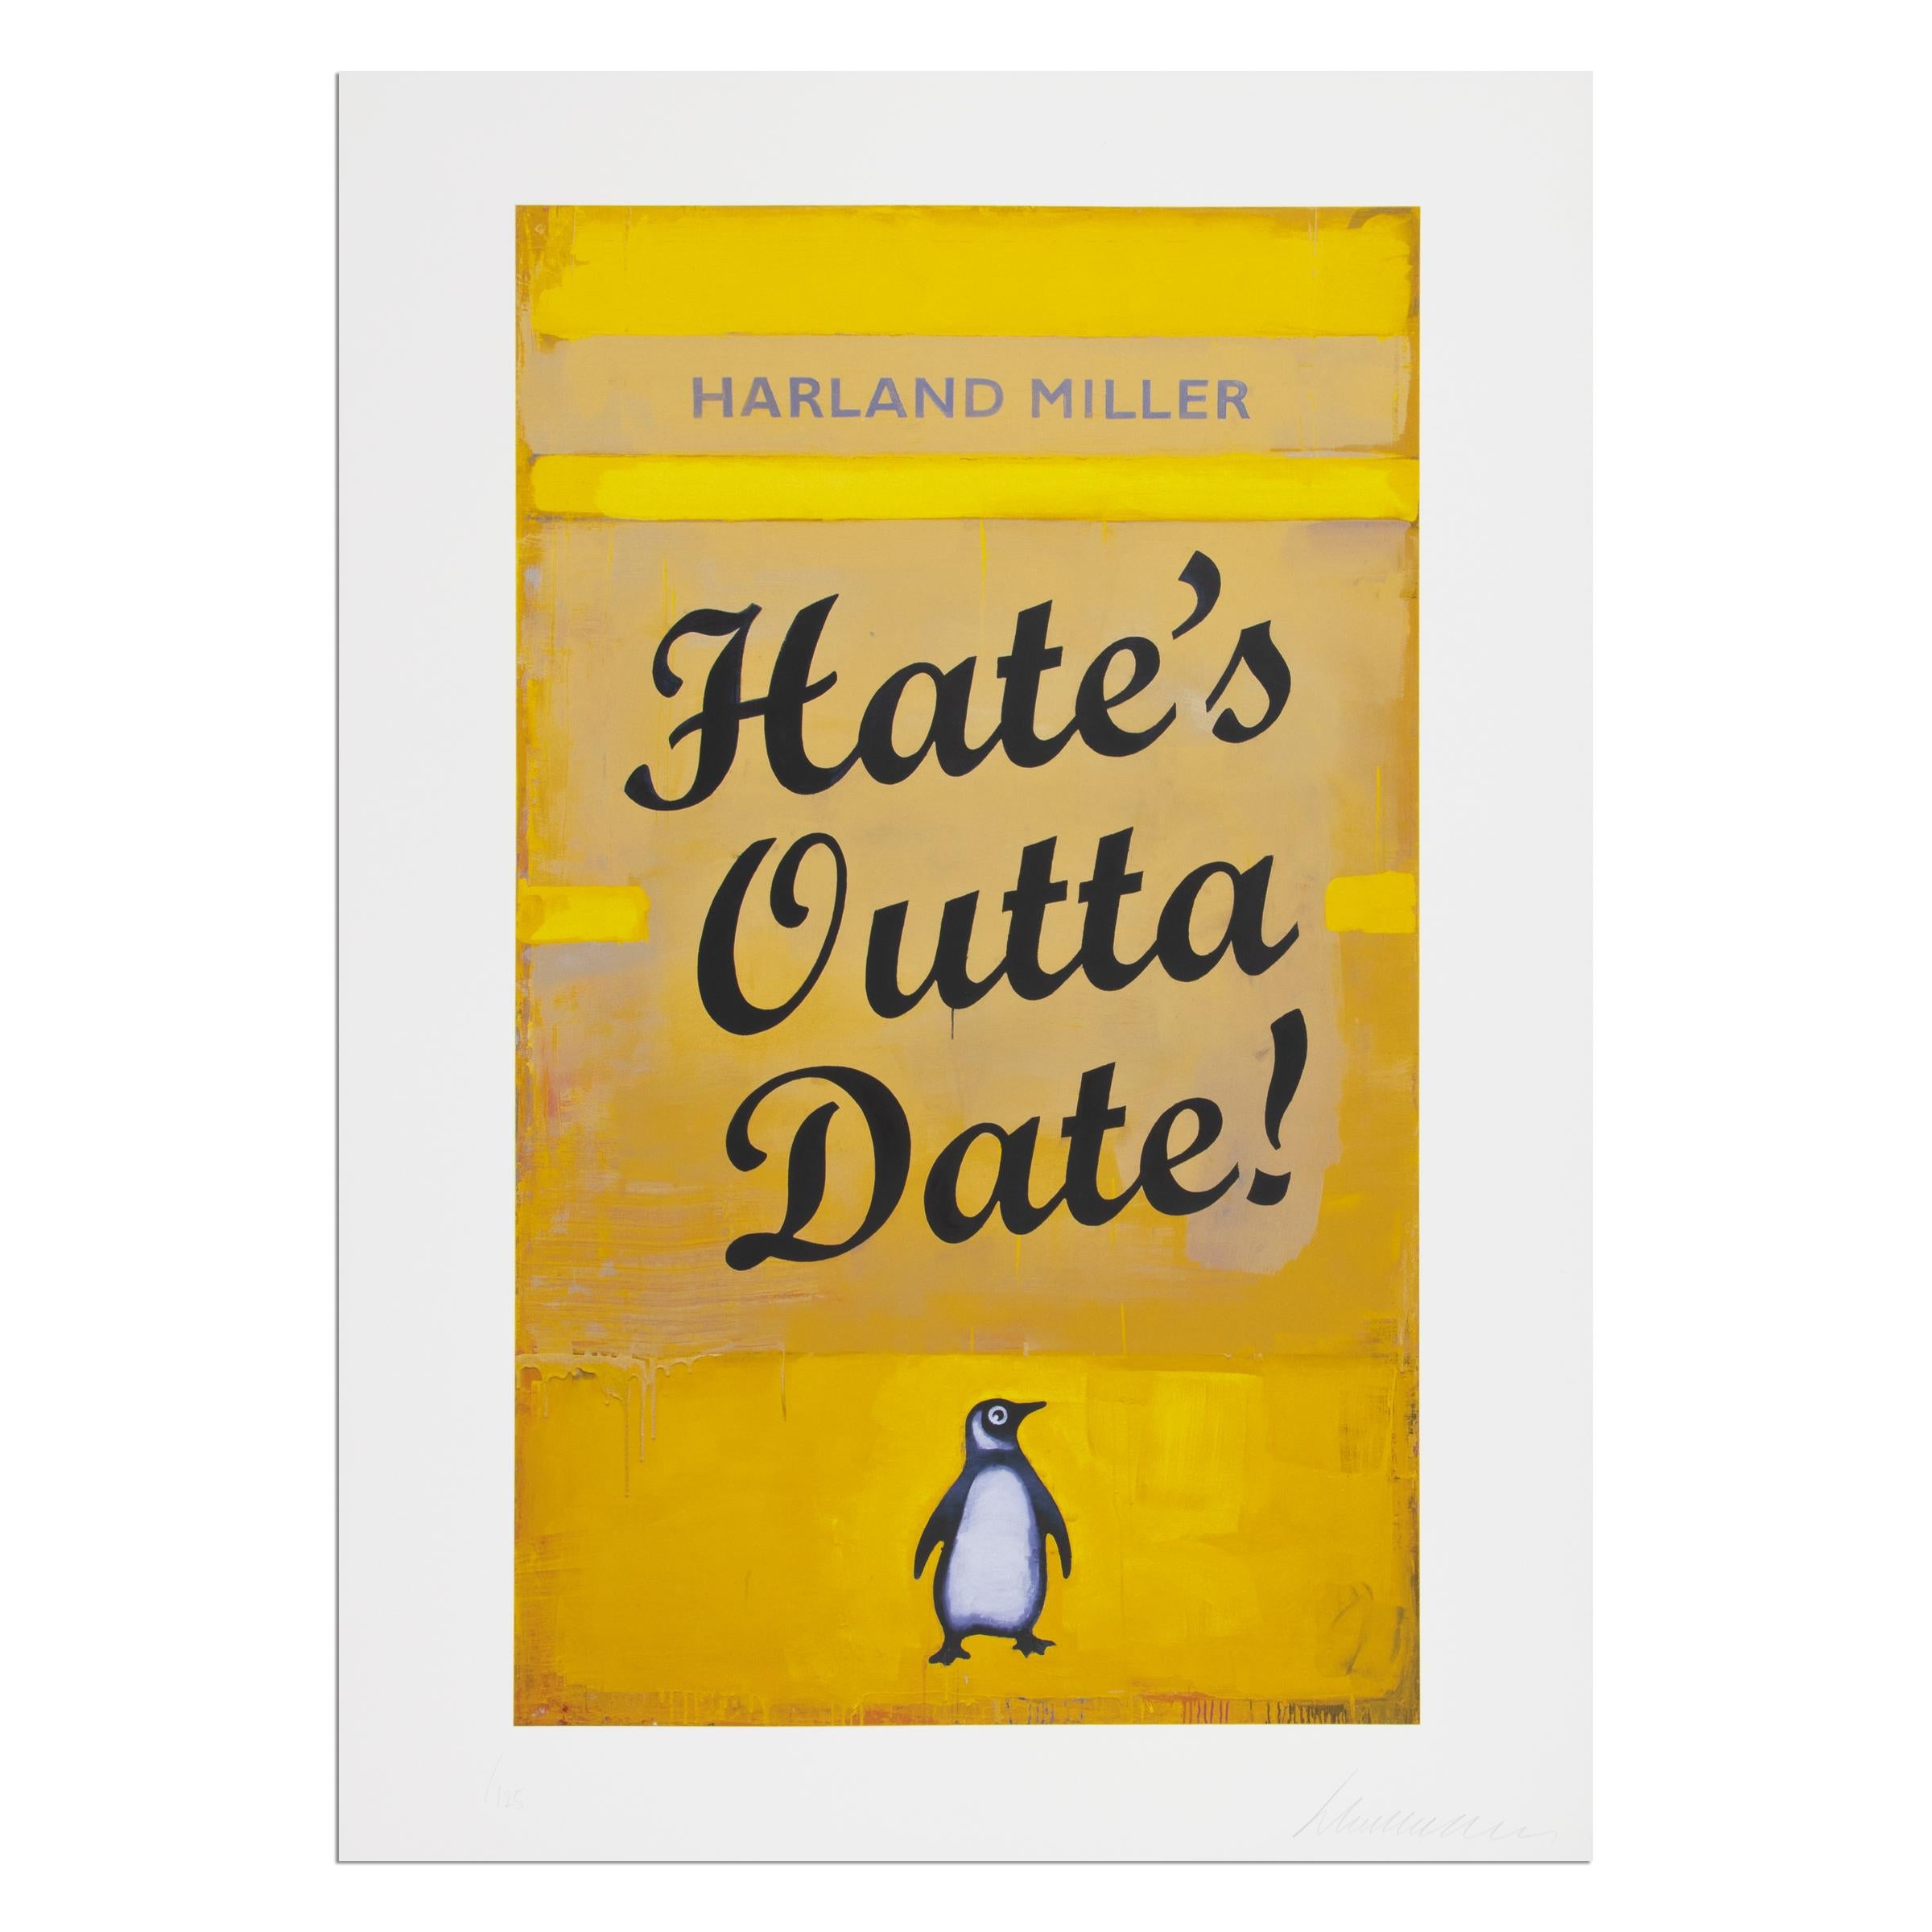 Harland Miller (British, b. 1964)
Hate’s Outta Date (Yellow), 2022
Medium: Screenprint on paper
Dimensions: 100 × 70 cm (39 2/5 × 27 3/5 in)
Edition of 125: Hand-signed and numbered
Condition: Mint